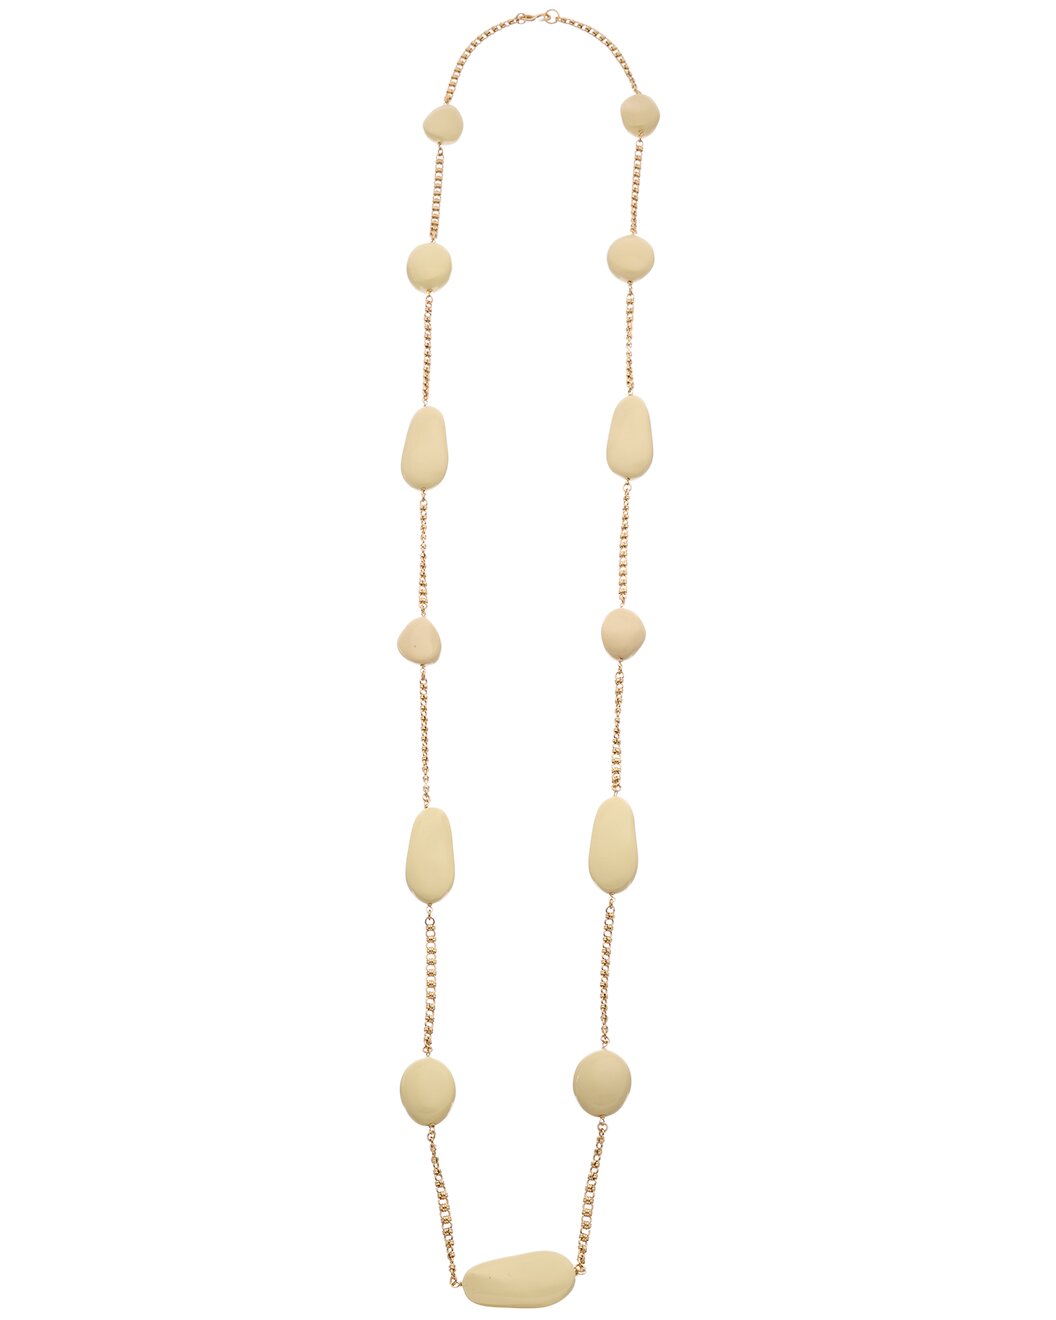 64" Gold Chain Necklace with Ivory Pebble Stations